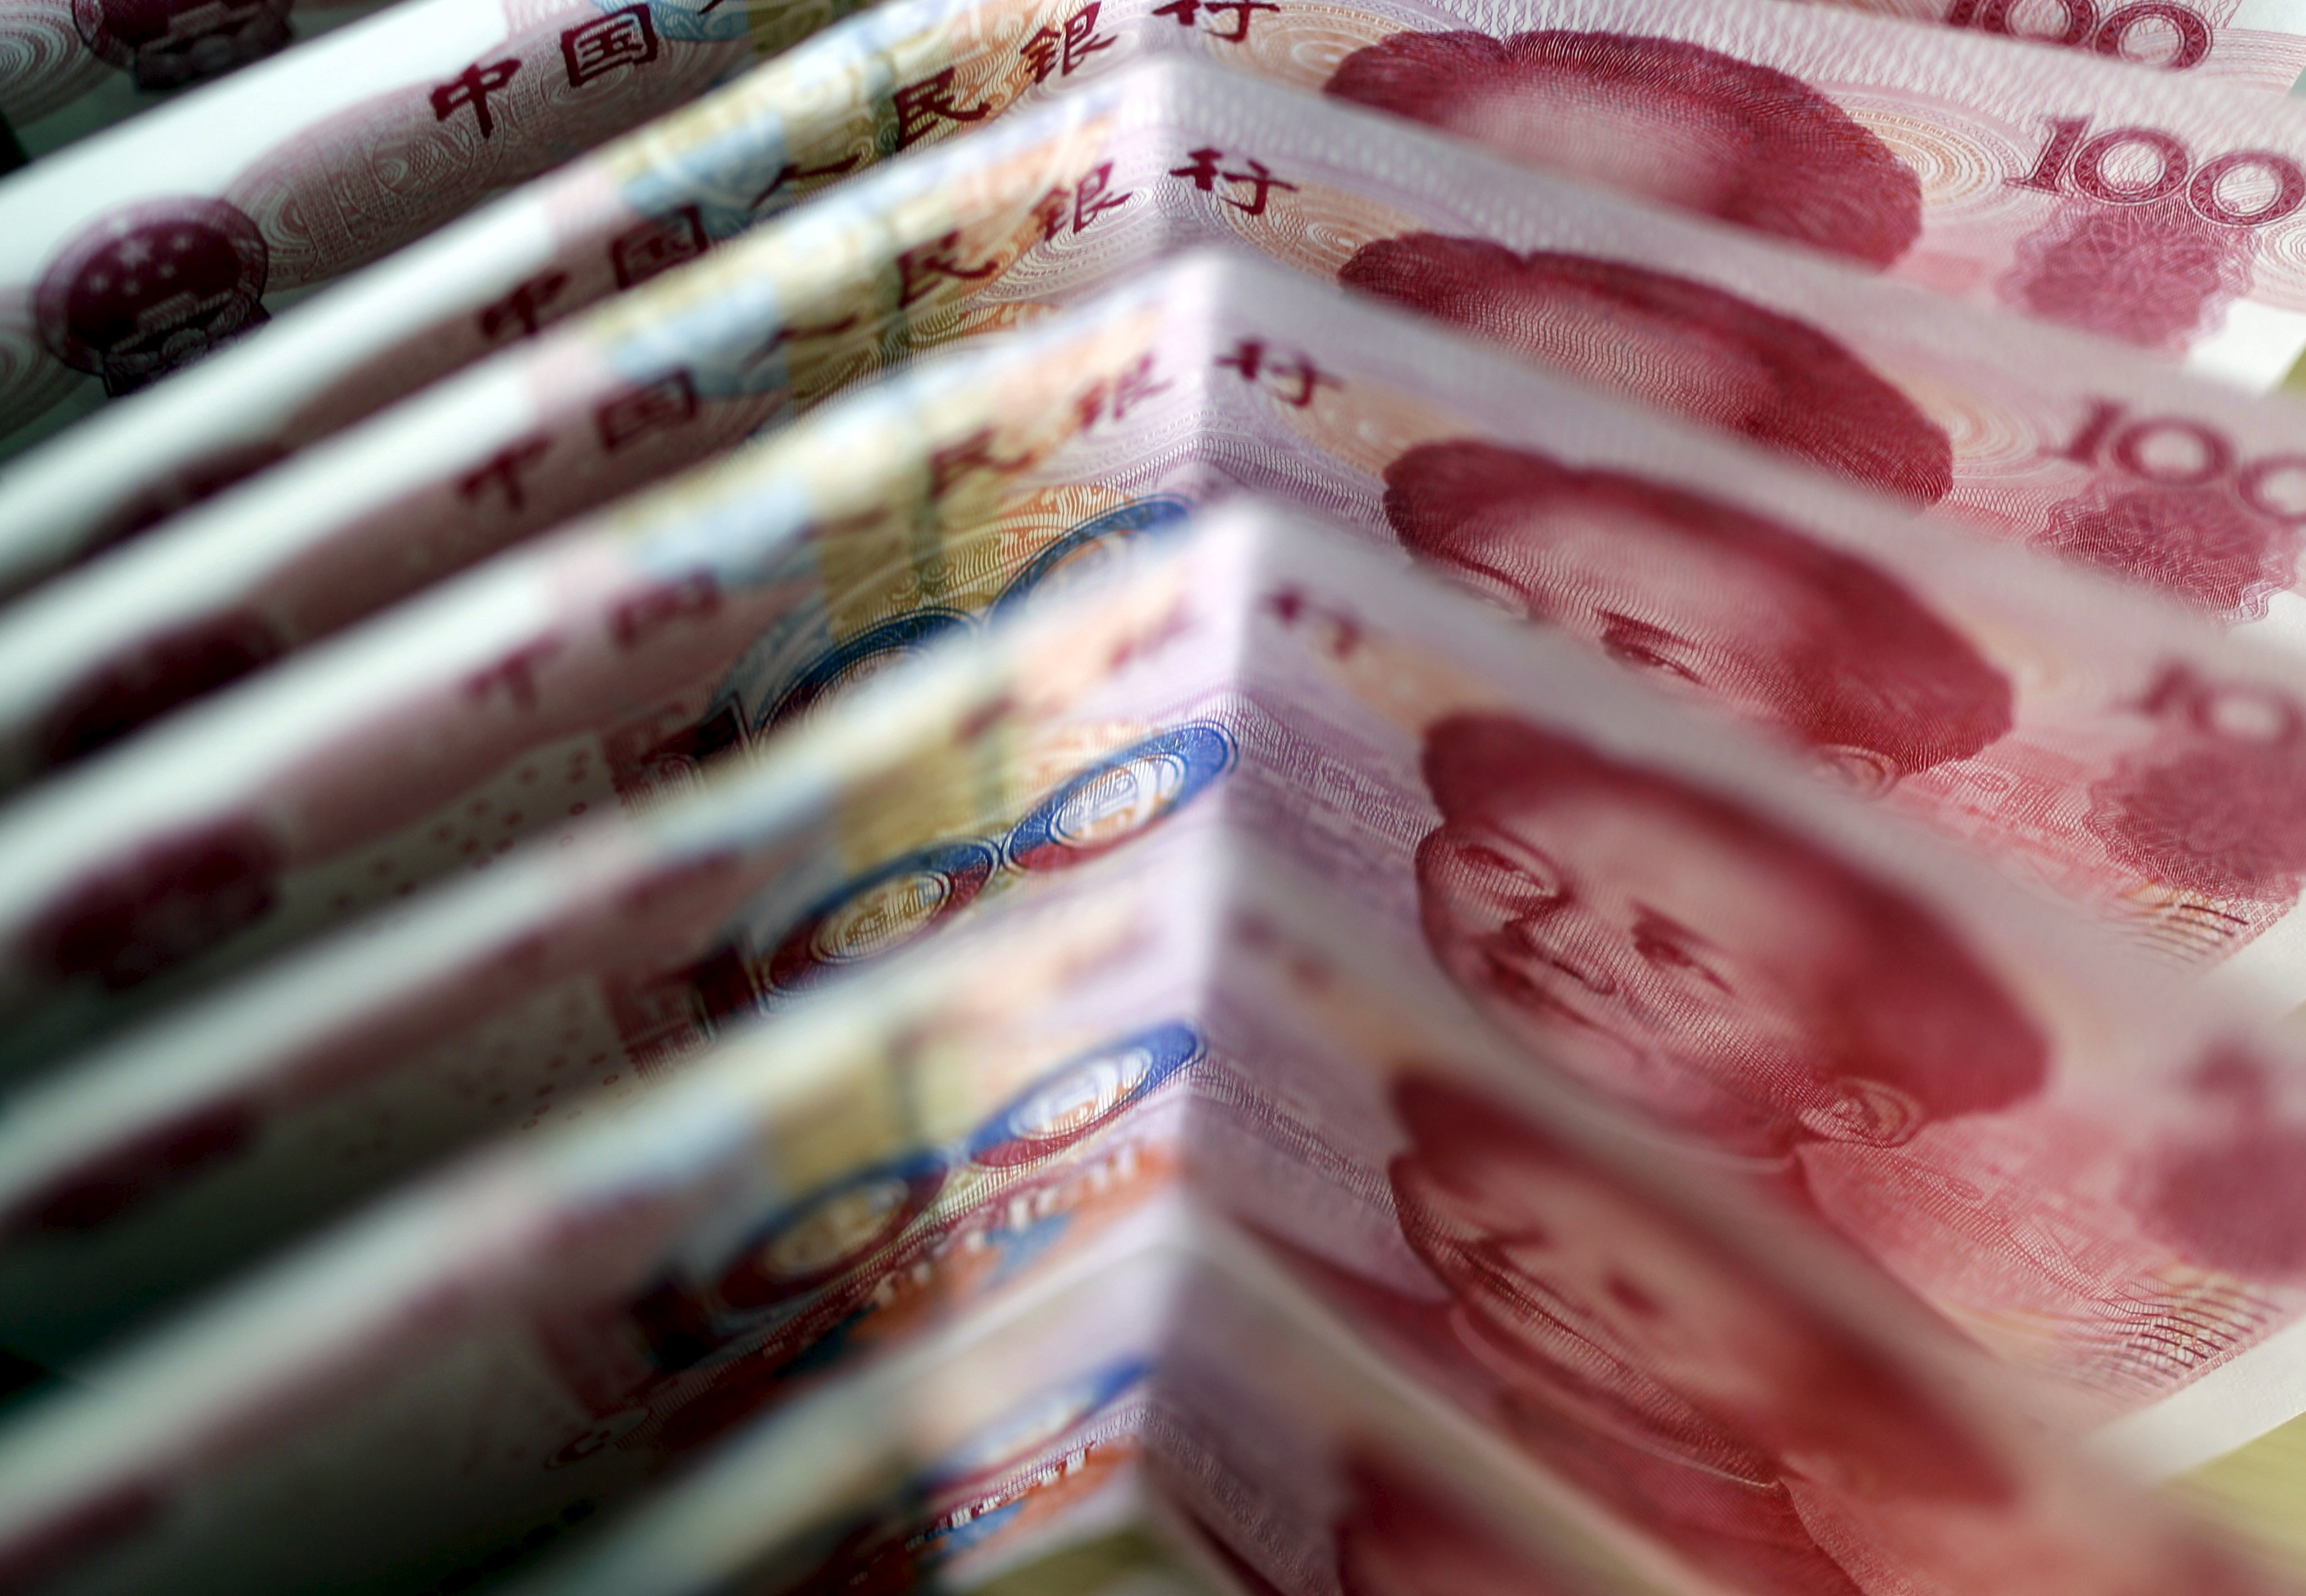 One-hundred Yuan notes are seen in this file picture illustration in Beijing in this March 22, 2011 file photo. China's yuan firmed in early trade on Friday after the central bank strengthened its official rate for the first time in nine trading days.REUTERS/Jason Lee/Files